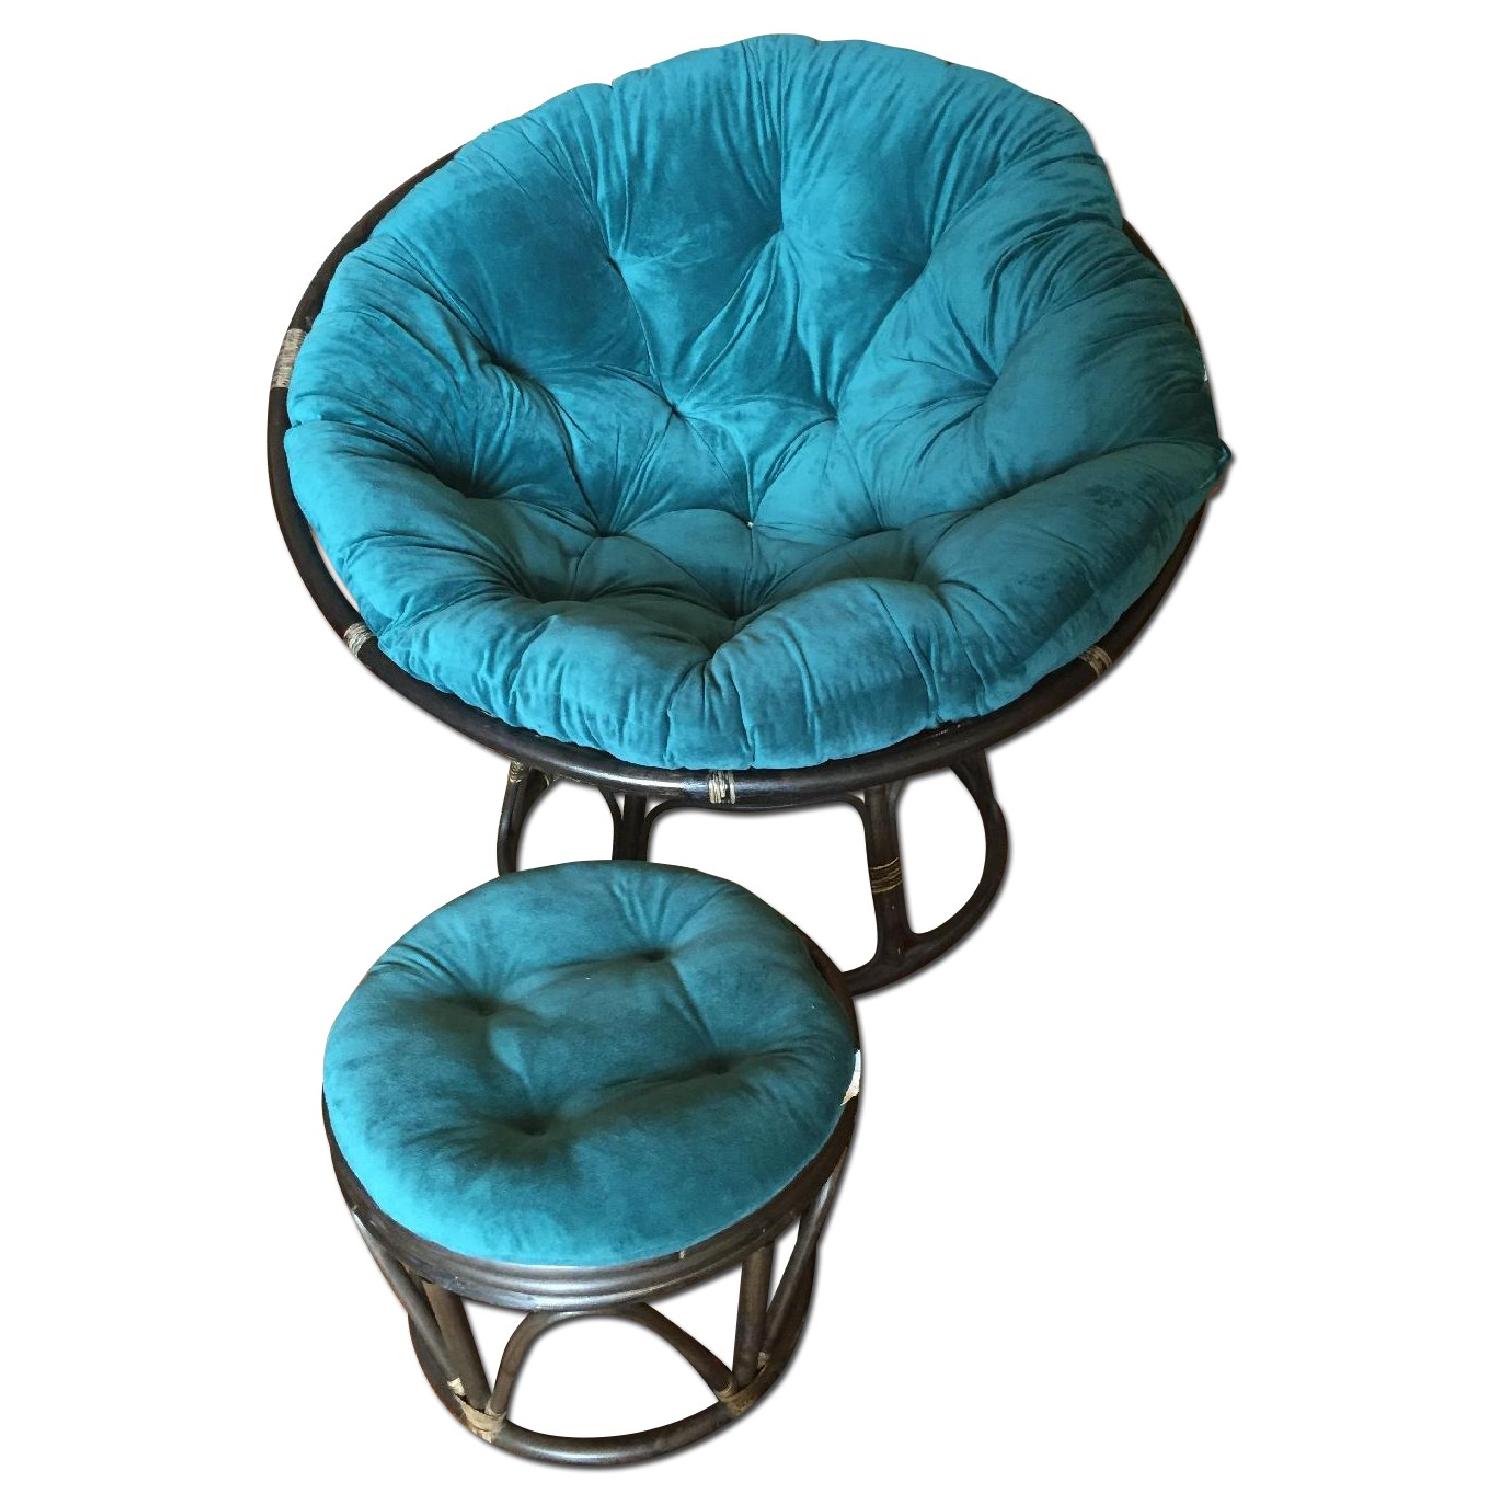 Discovering Comfort: The Pier One Papasan Chair Experience插图4